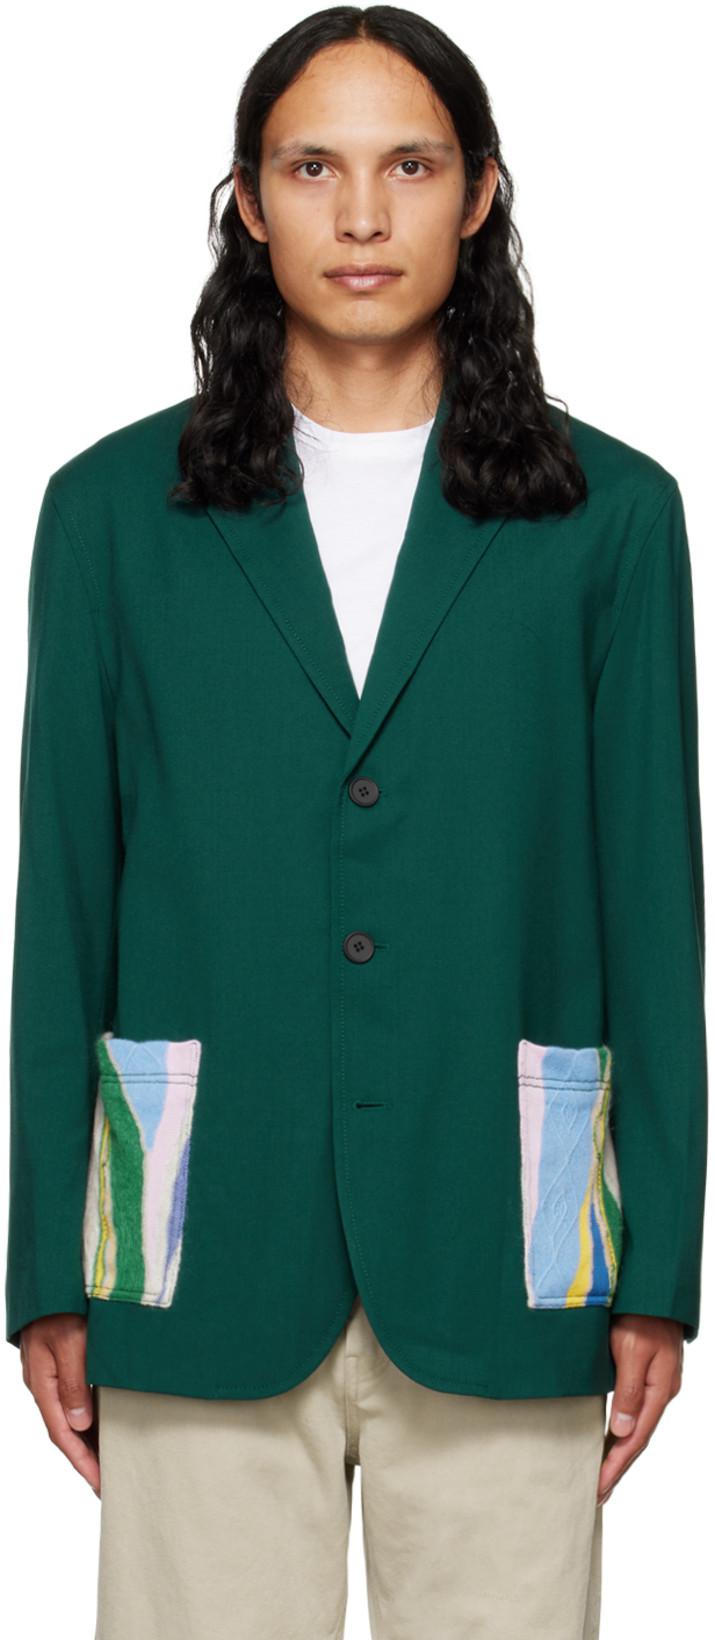 Green Notched Lapel Blazer by A PERSONAL NOTE 73